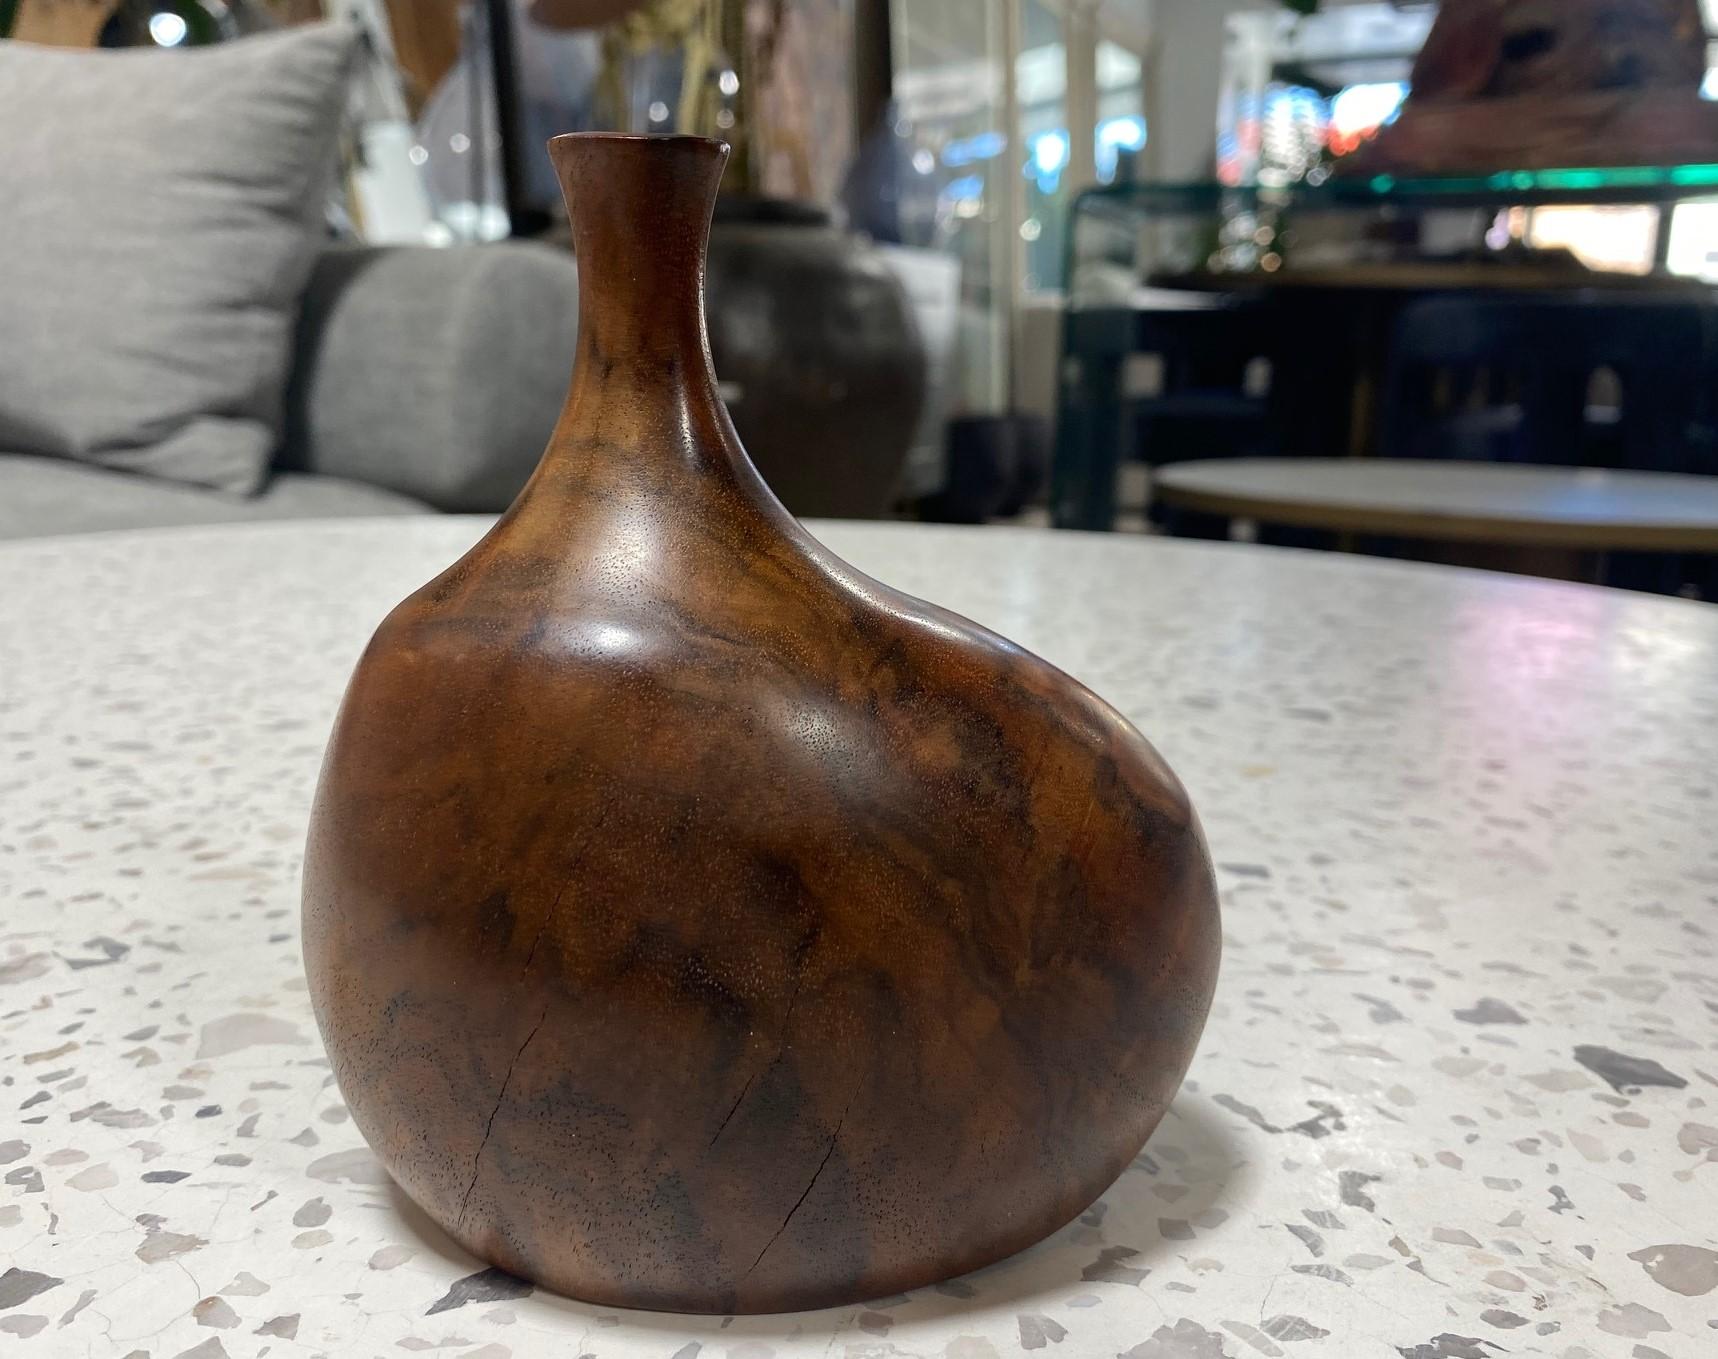 A very beautifully made and sculpted wood-turned weed vase by famed American (Mendocino, California) artist/ sculptor Doug Ayers. The natural, organic wood grain is quite spectacular in this piece. 

Signed by Ayers on the base.

Ayers's work is